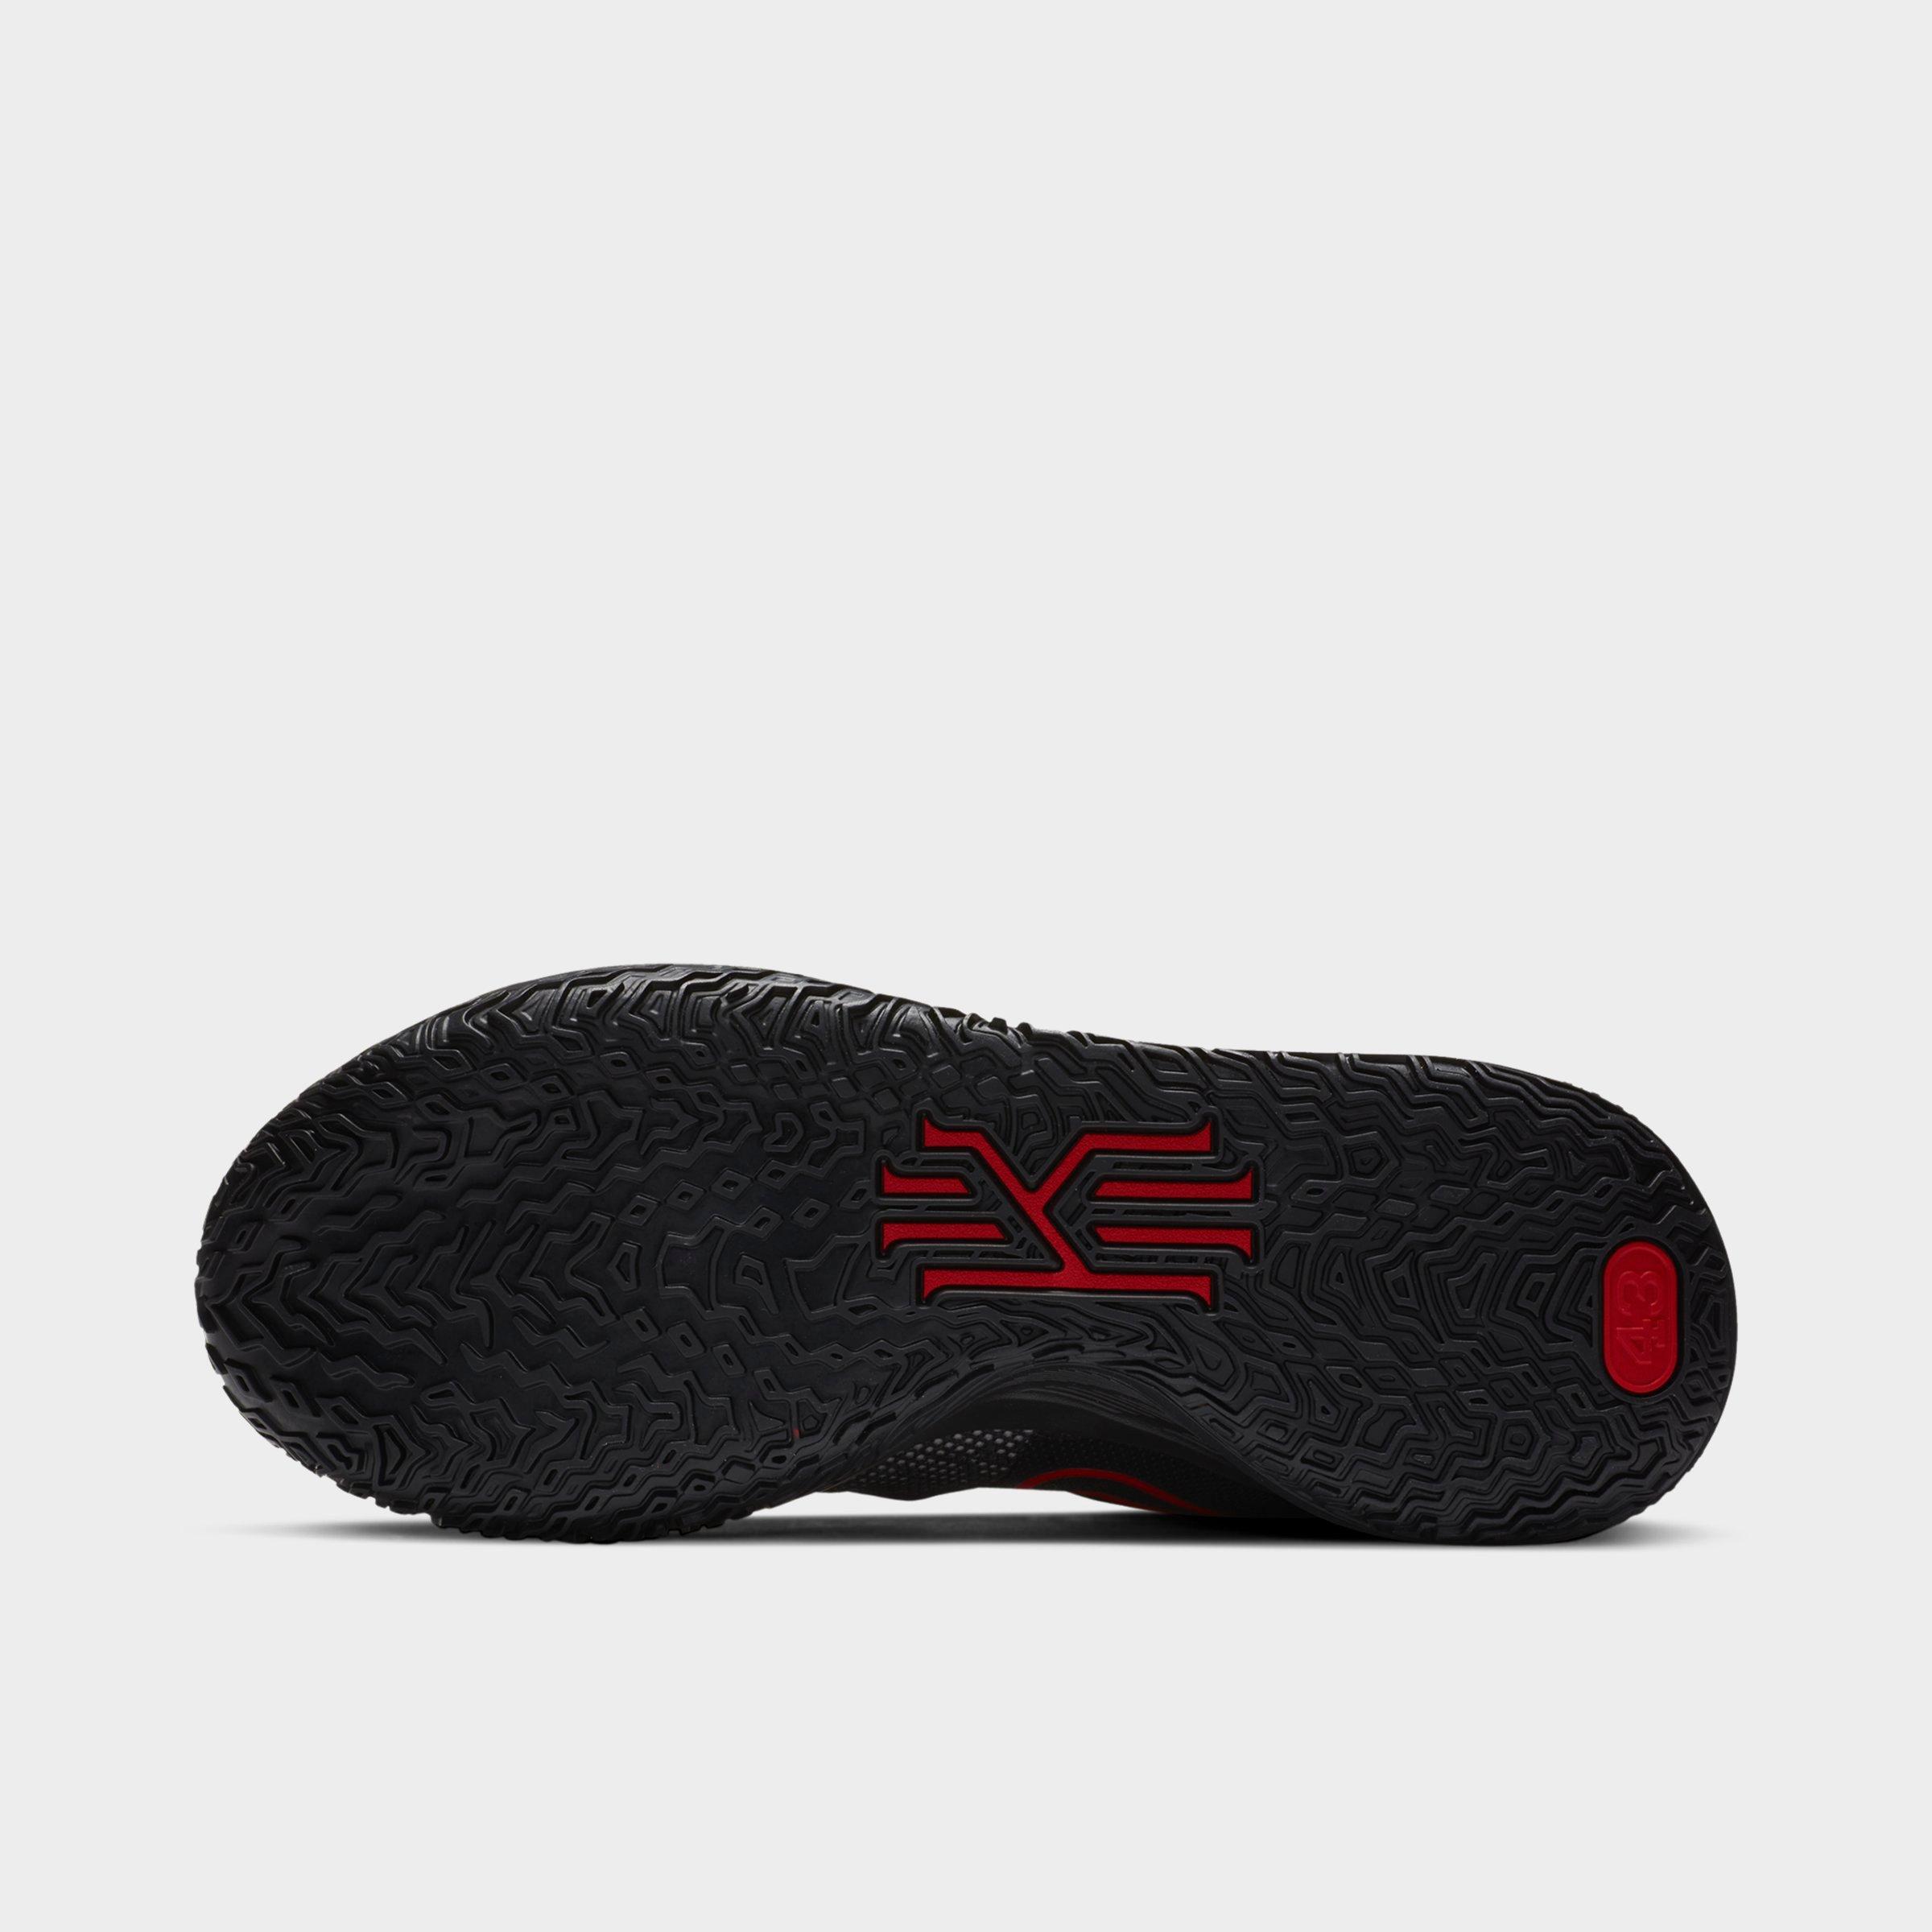 kyrie slippers